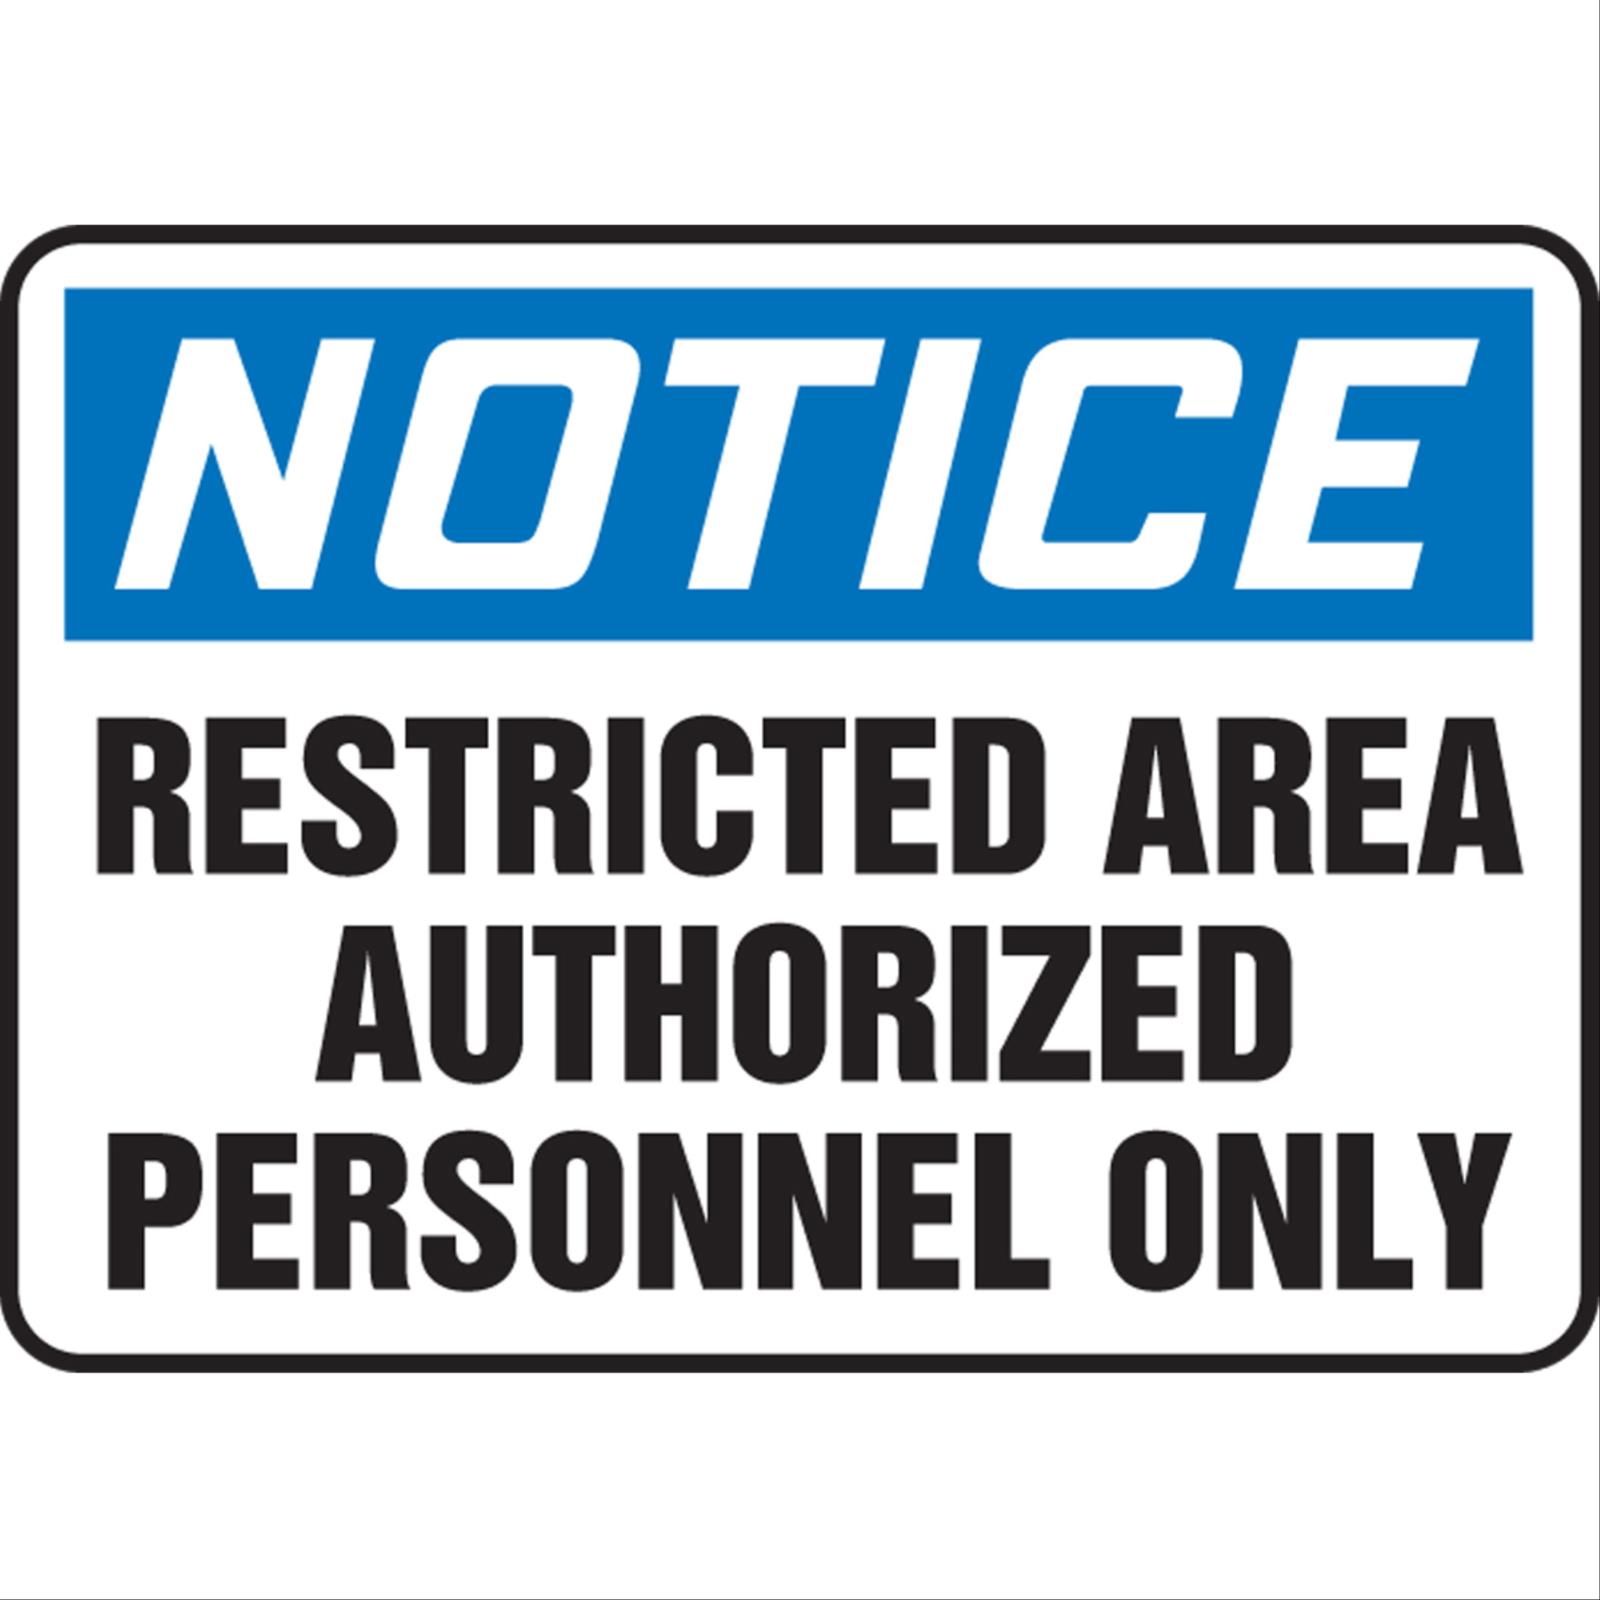 Notice Restricted Area Authorized Personnel Only Signs